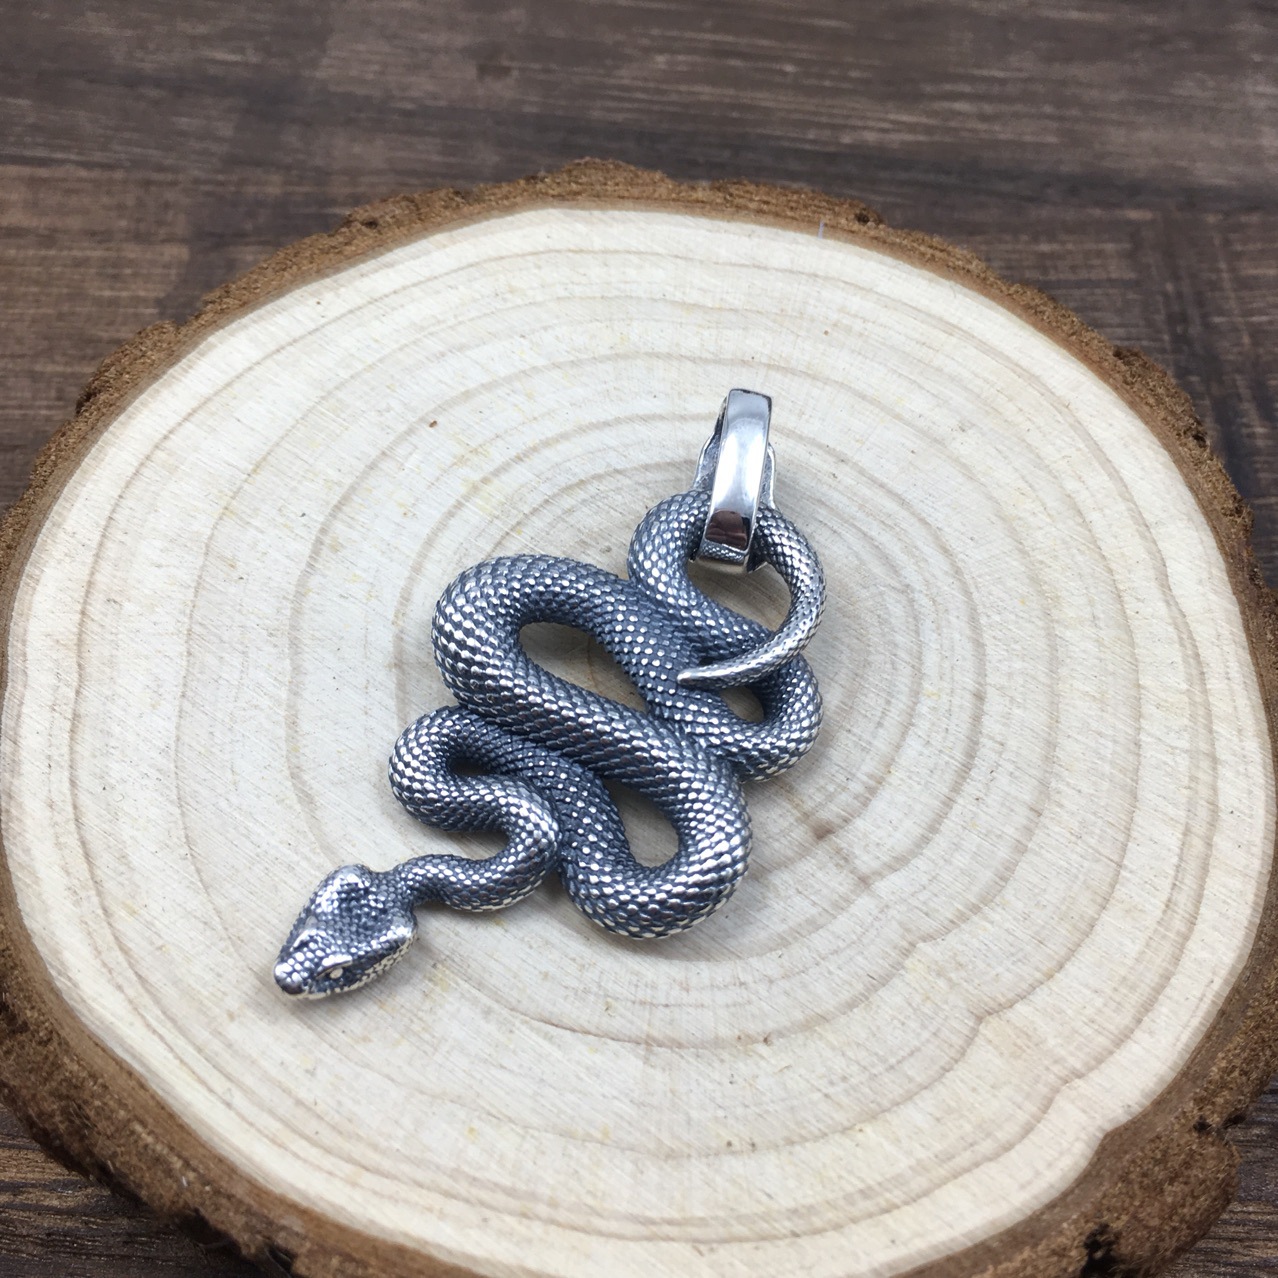 "Mens Silver Pendant - Python, the Mark of Sophistication"